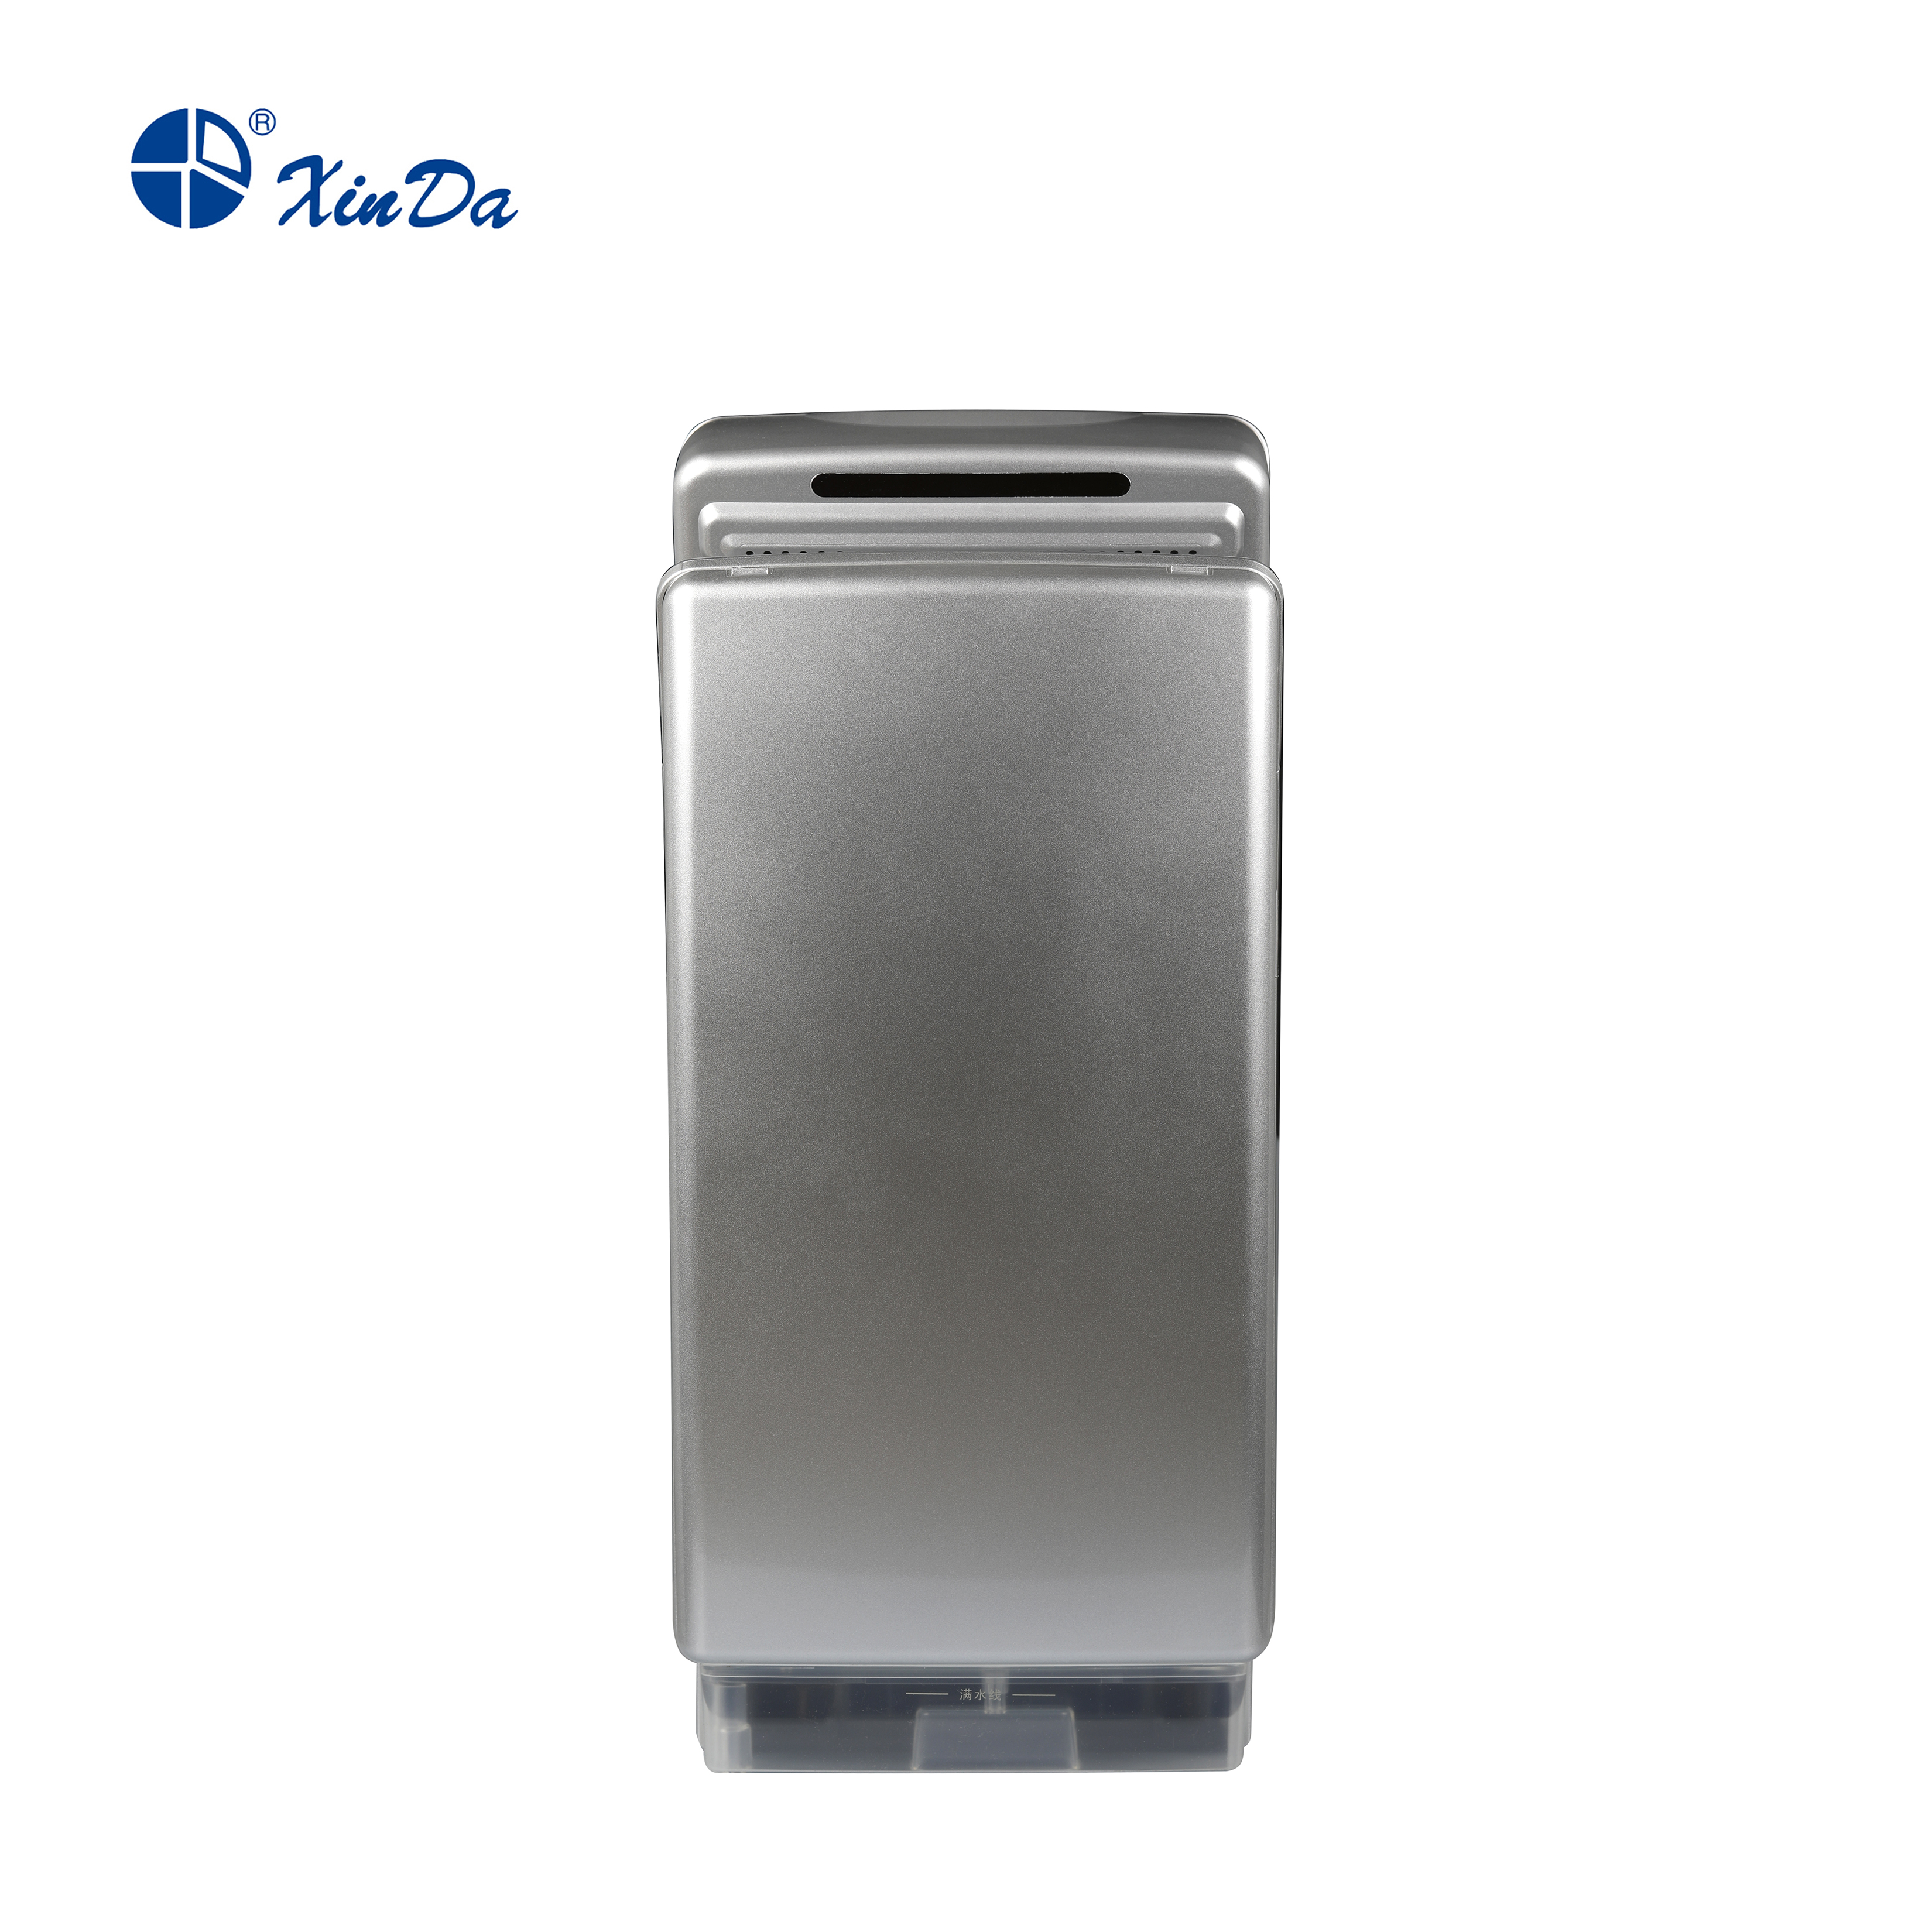 The XinDa GSQ70A Silver Fuzhou Bathroom Accessories High Speed Hand Dryer With Hot Cold Air Hand Dryer